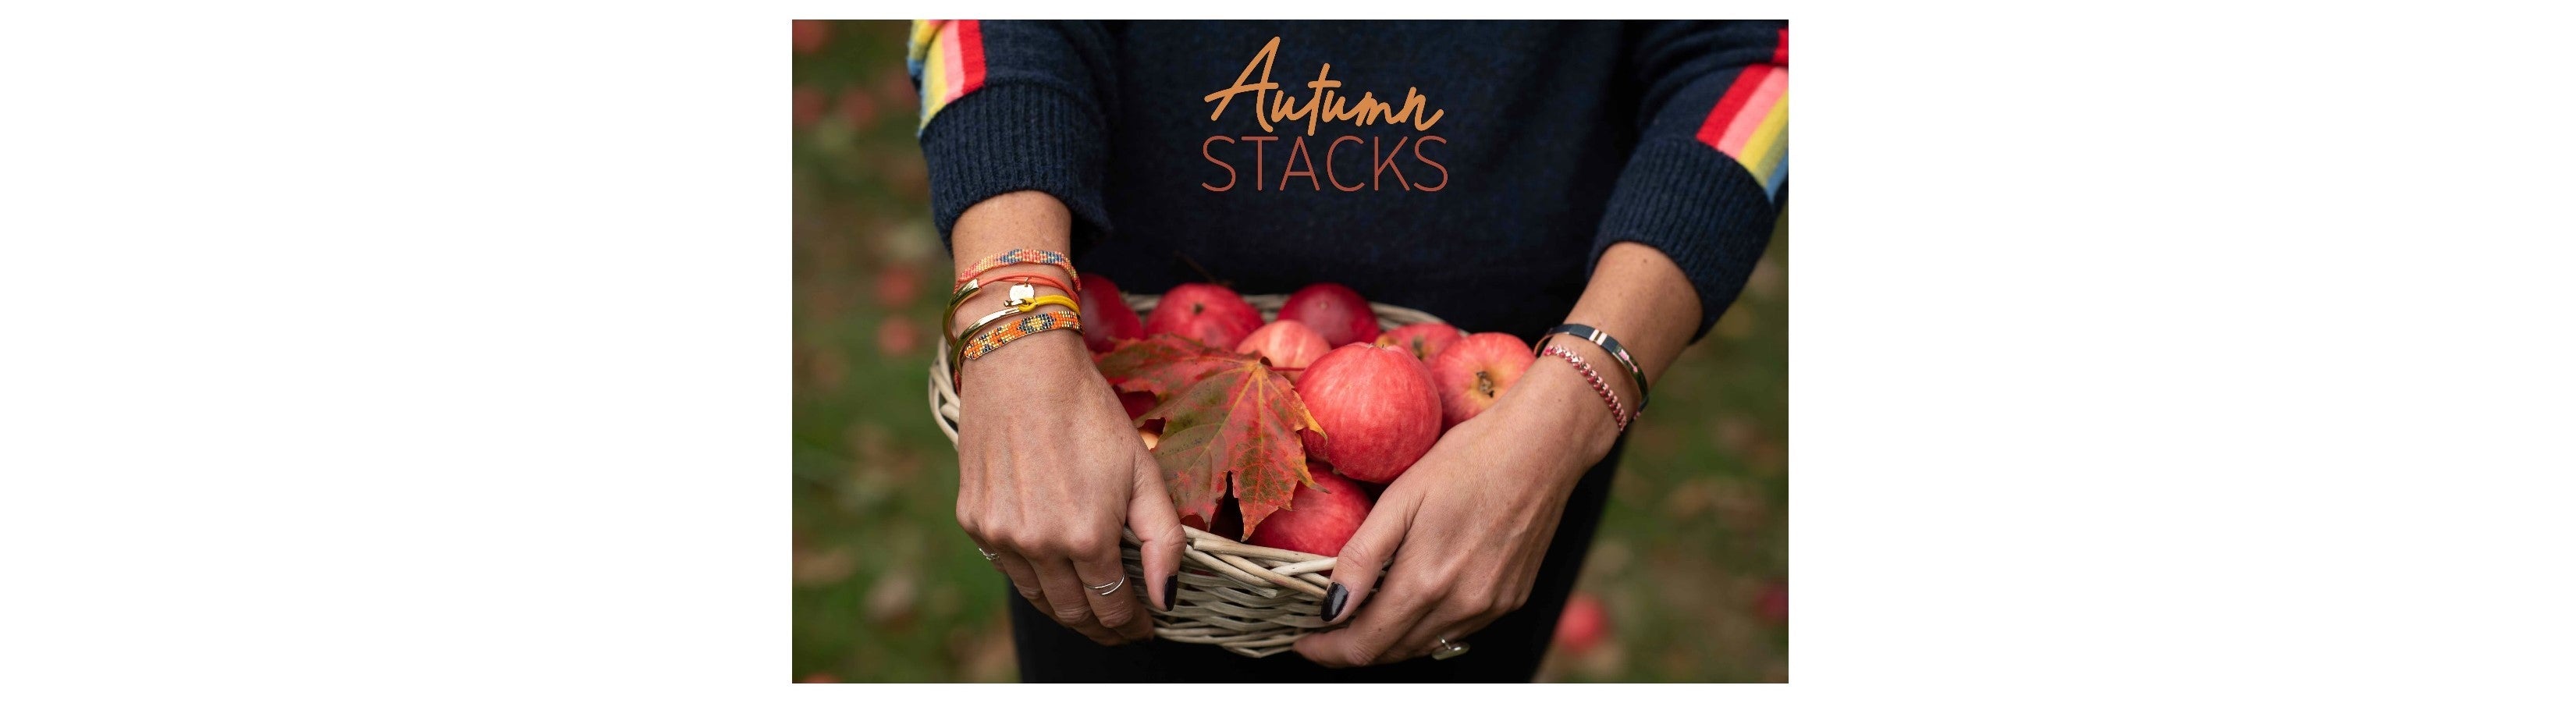 Get the Layered Look: Stacks